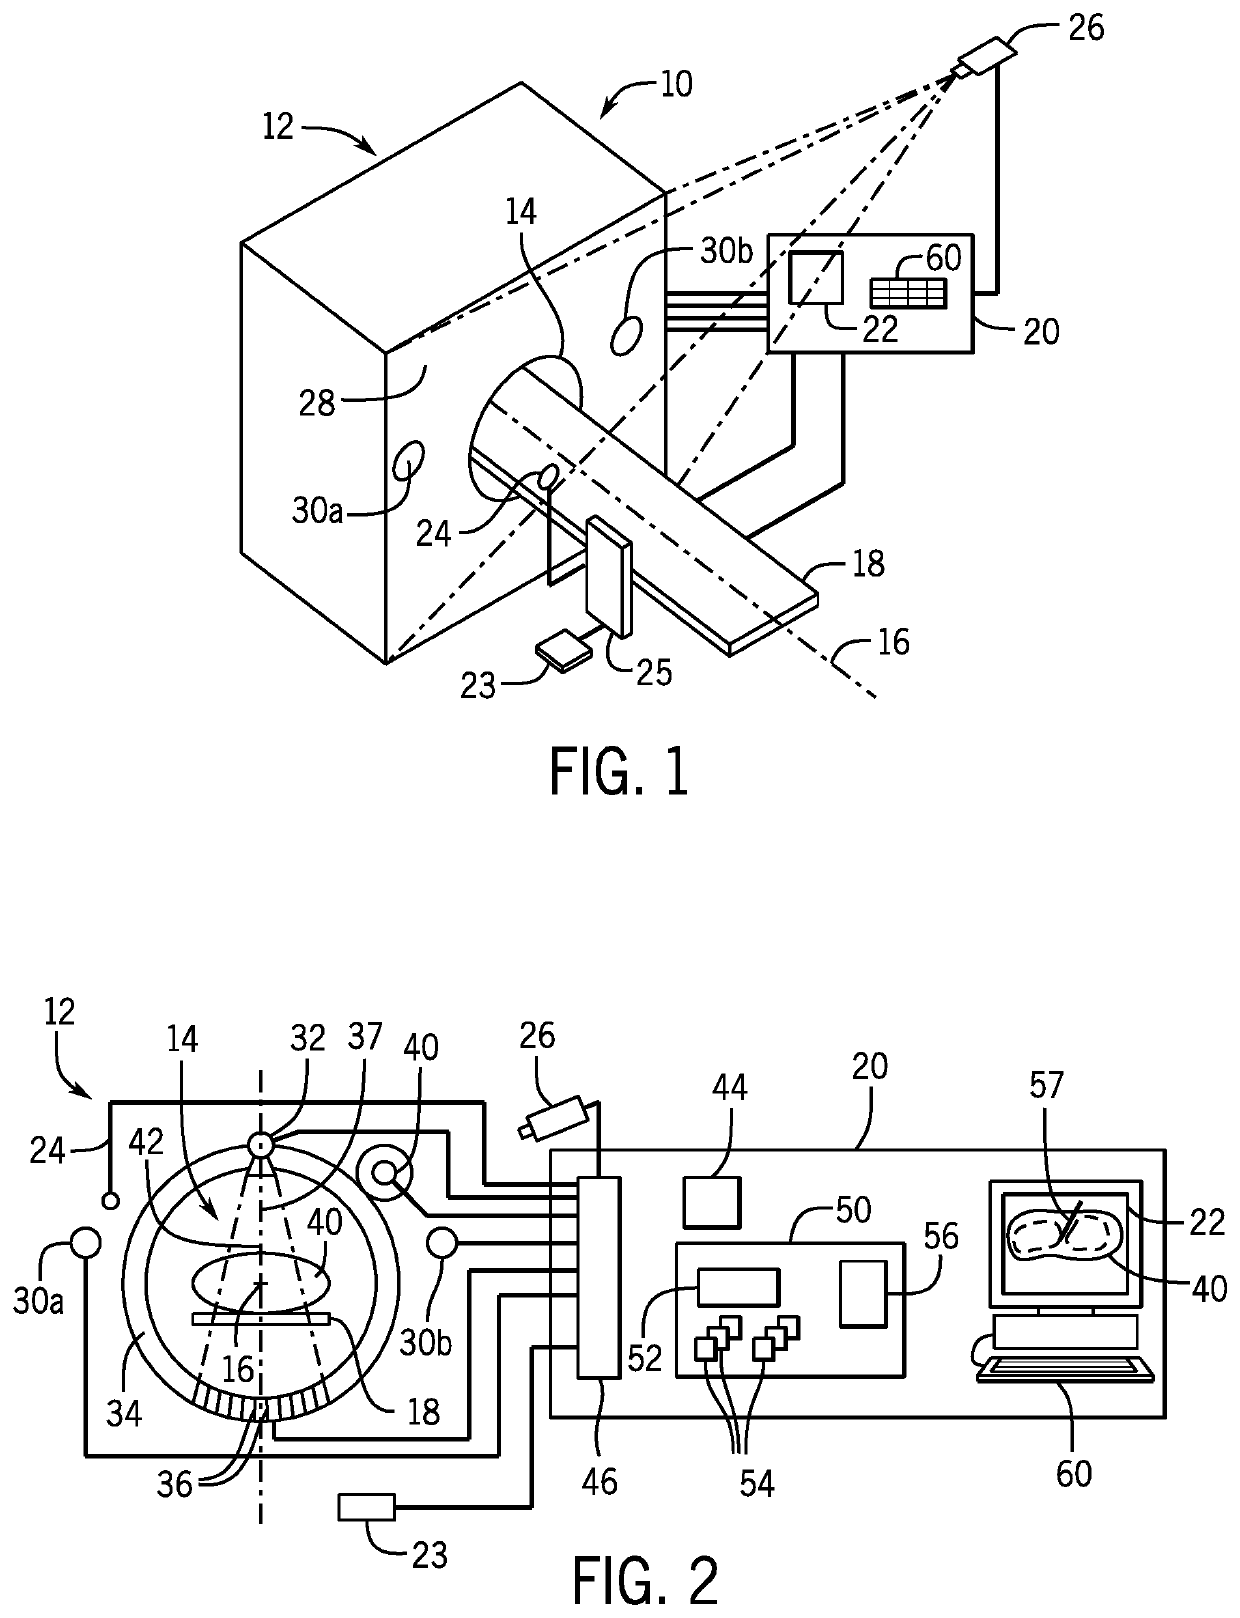 Computed tomography machine for interventional use